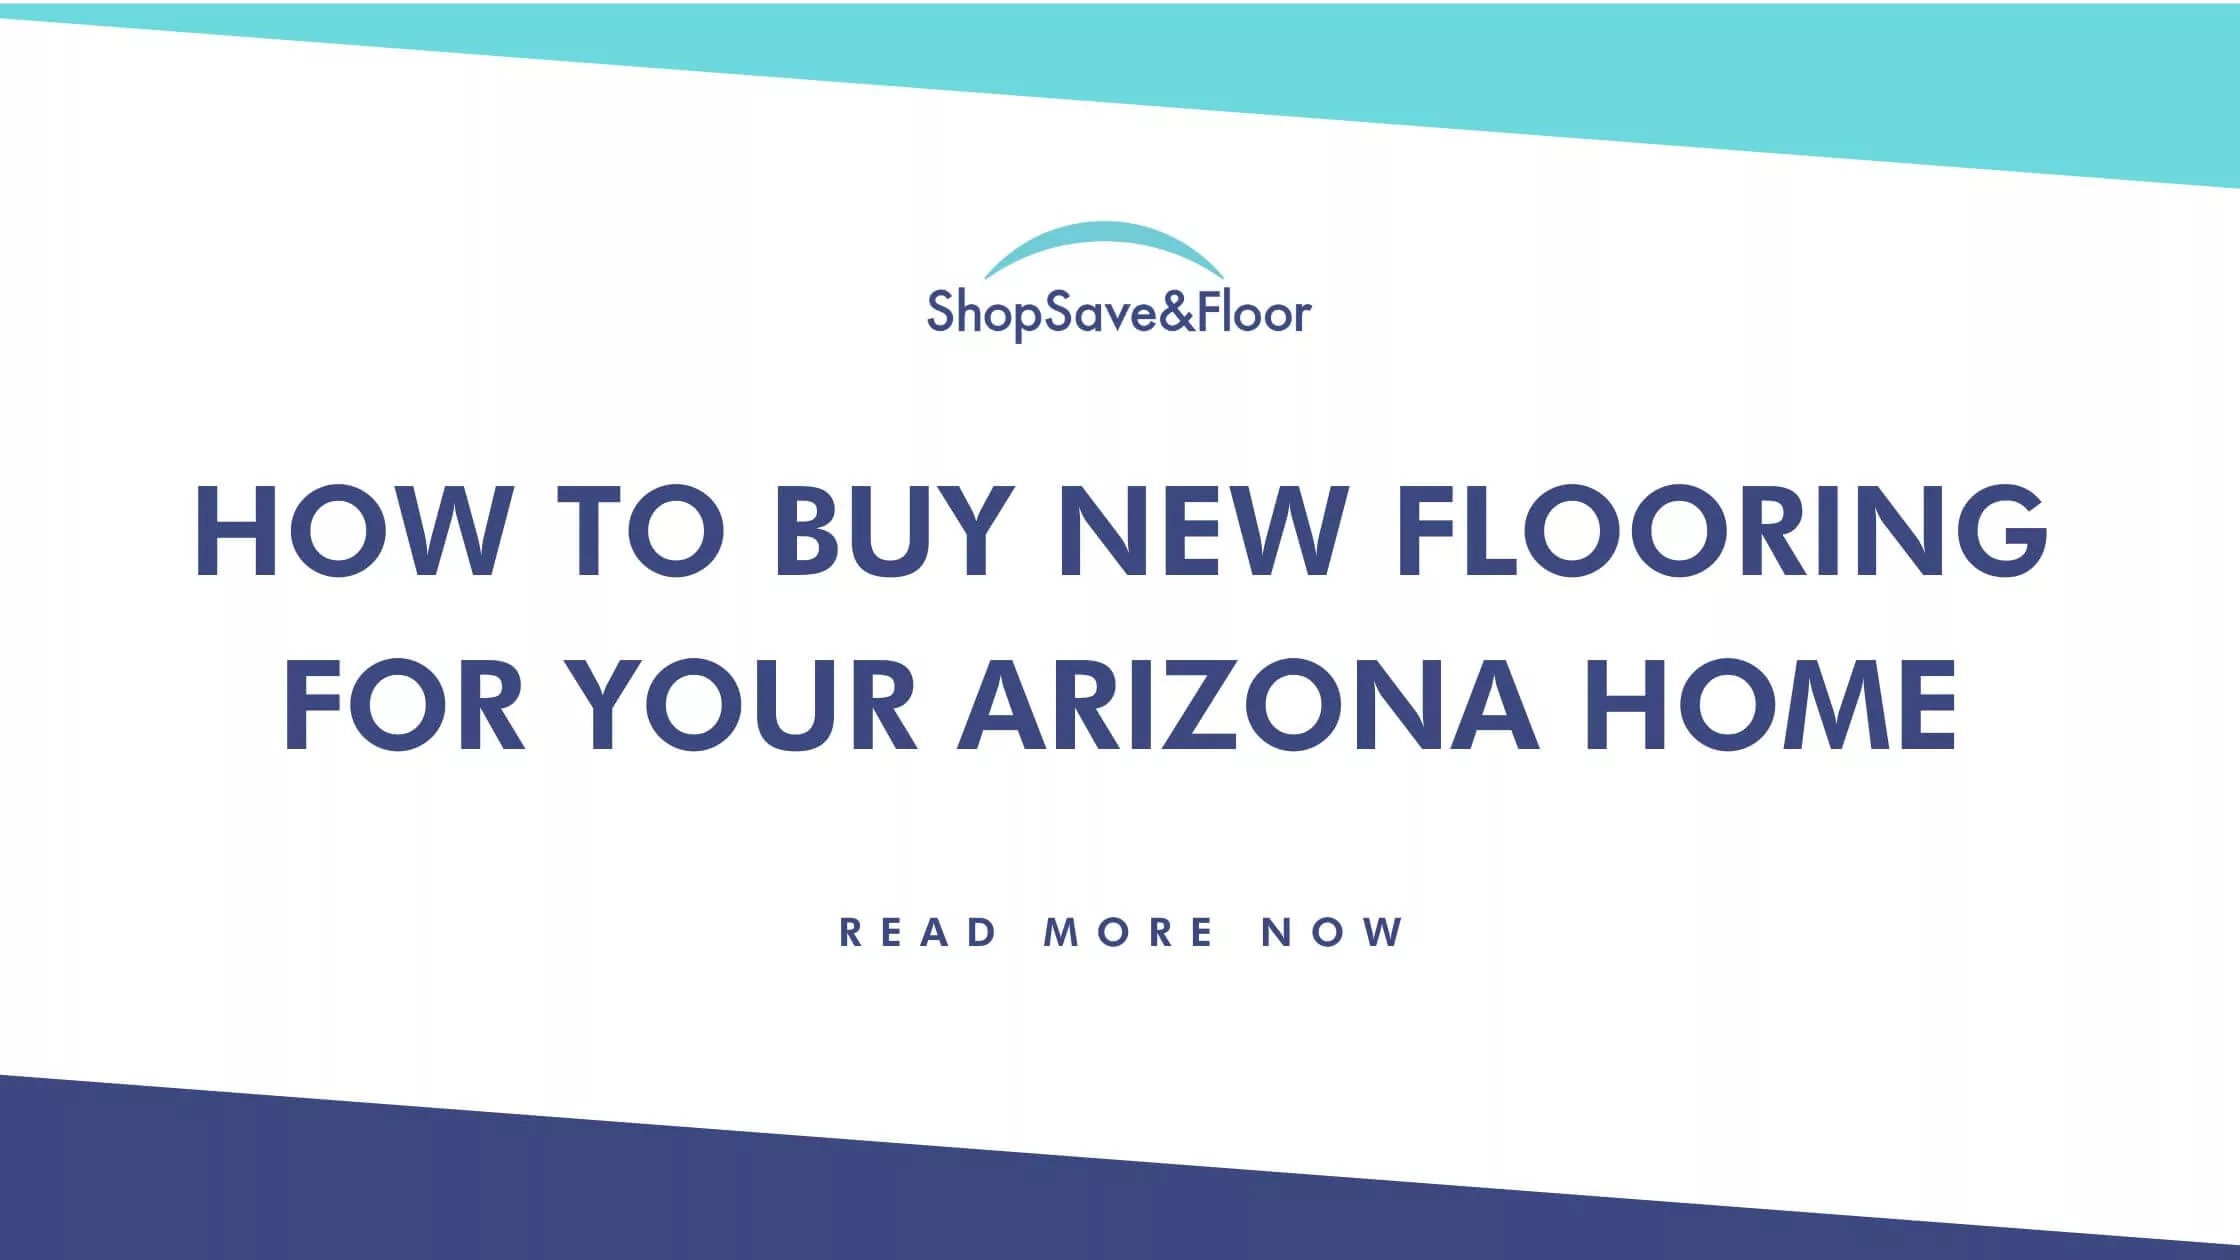 How To Buy New Flooring For Your Arizona Home